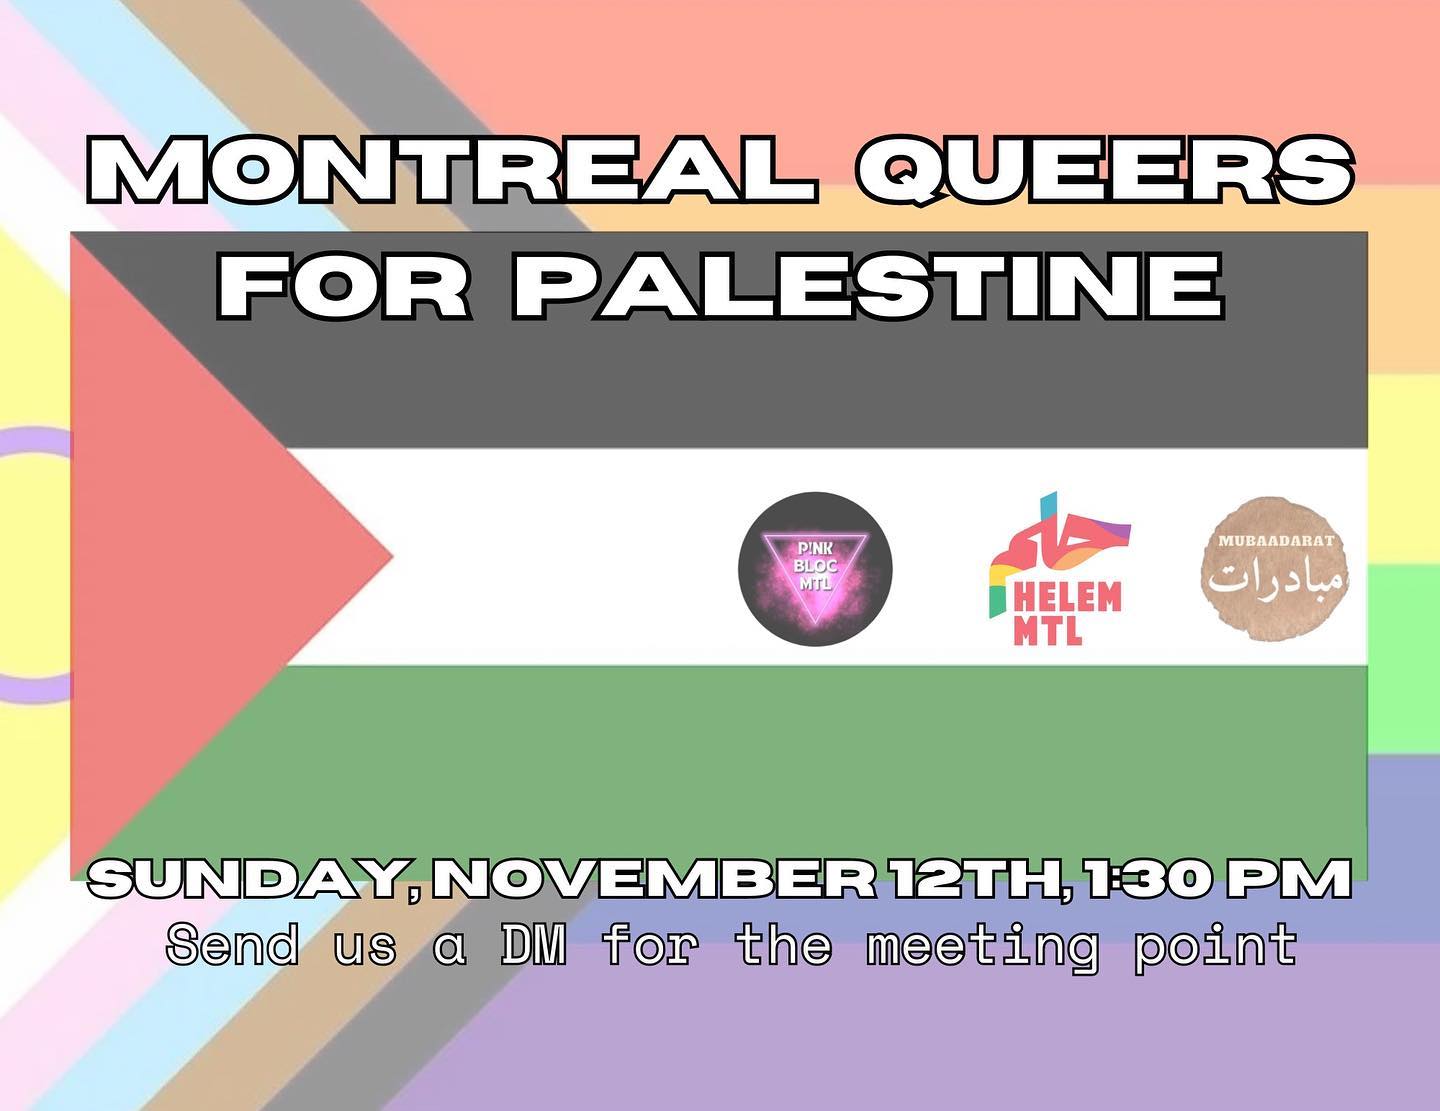 The image features the text : Montreal queers for Palestine. Friday november 12th, 1:30 pm. Please DM us for meeting point The image features a palestinian flag, a pride flag, and the logo of Helem, Mubaadarat and Pink Bloc